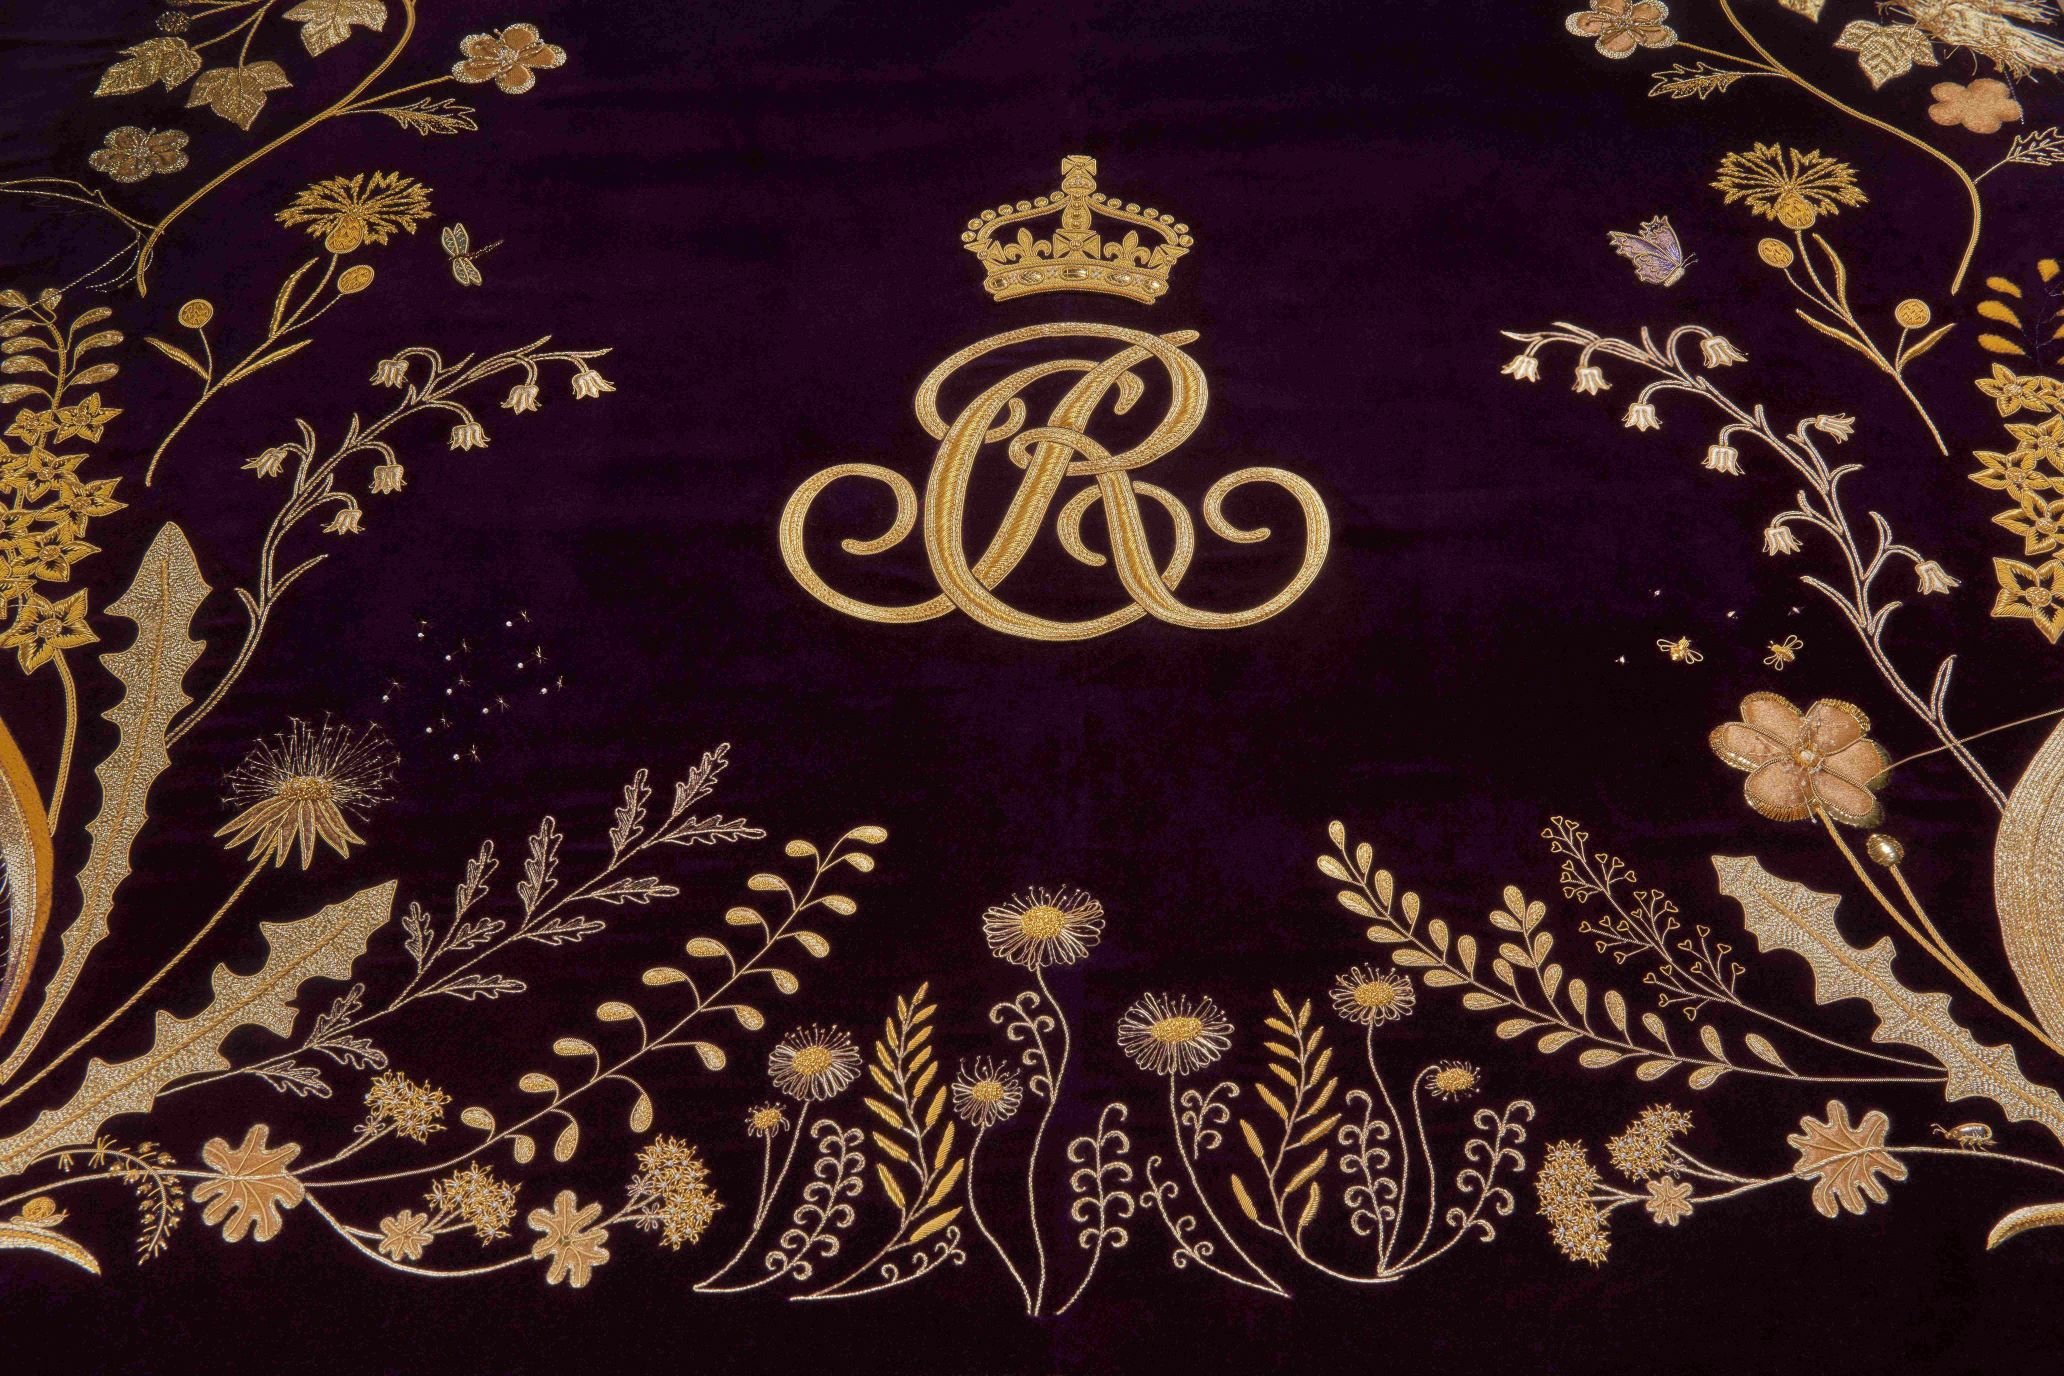 Her Majesty Queen Camilla's Robe of Estate